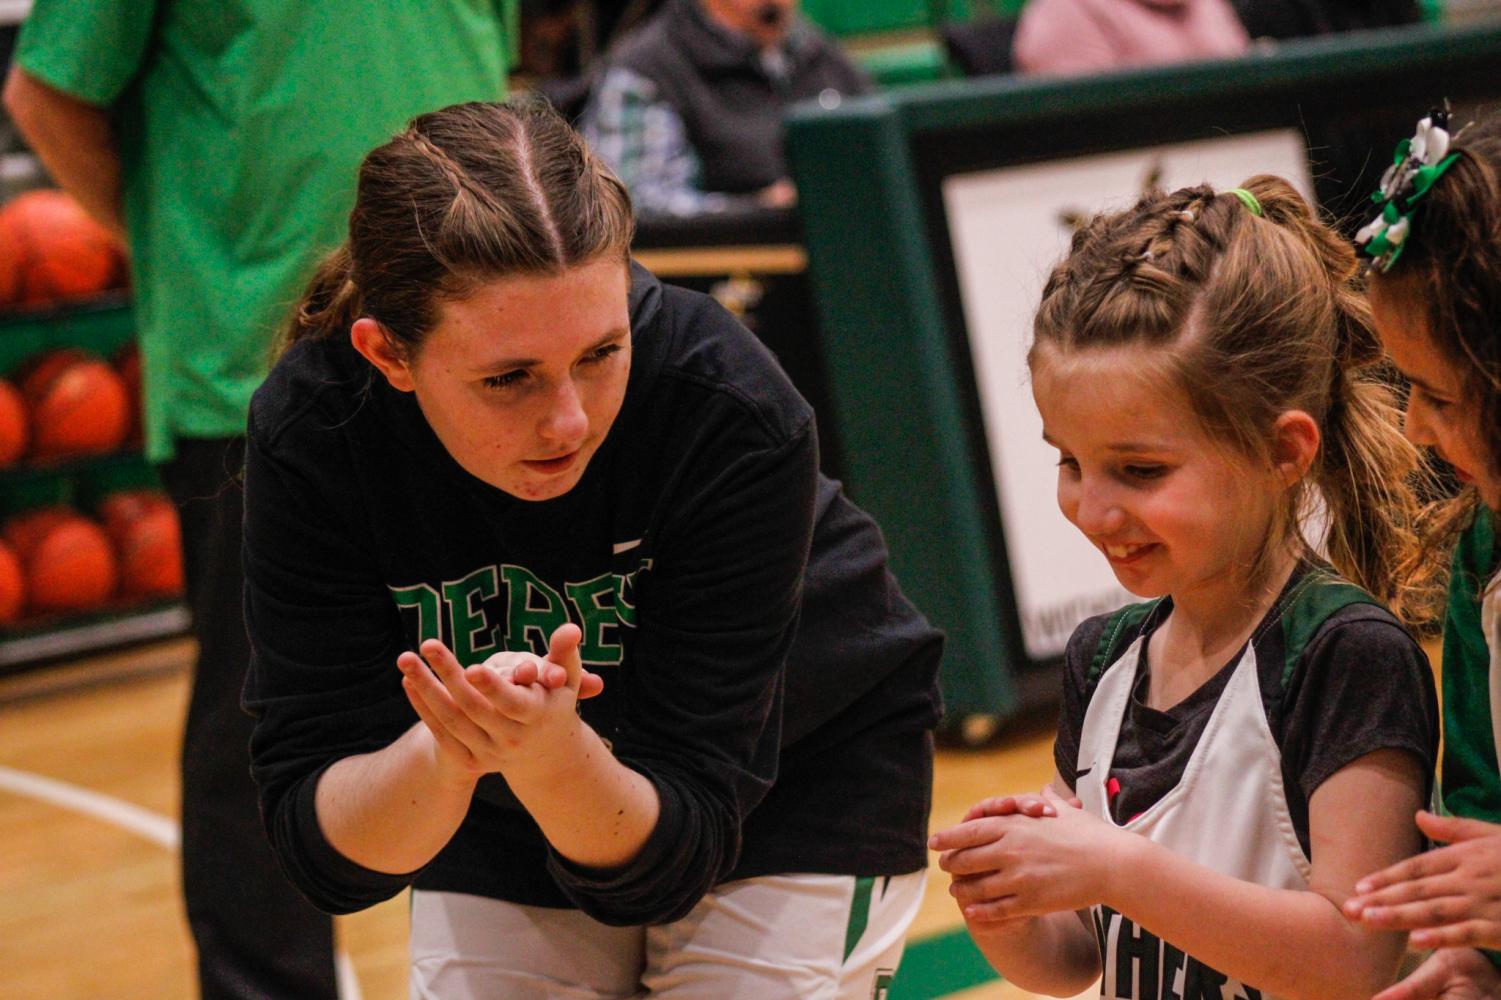 Girls+basketball+sub-state+semi-finals+V.+Lawrence+Free+State+%28Photos+by+William+Henderson%29